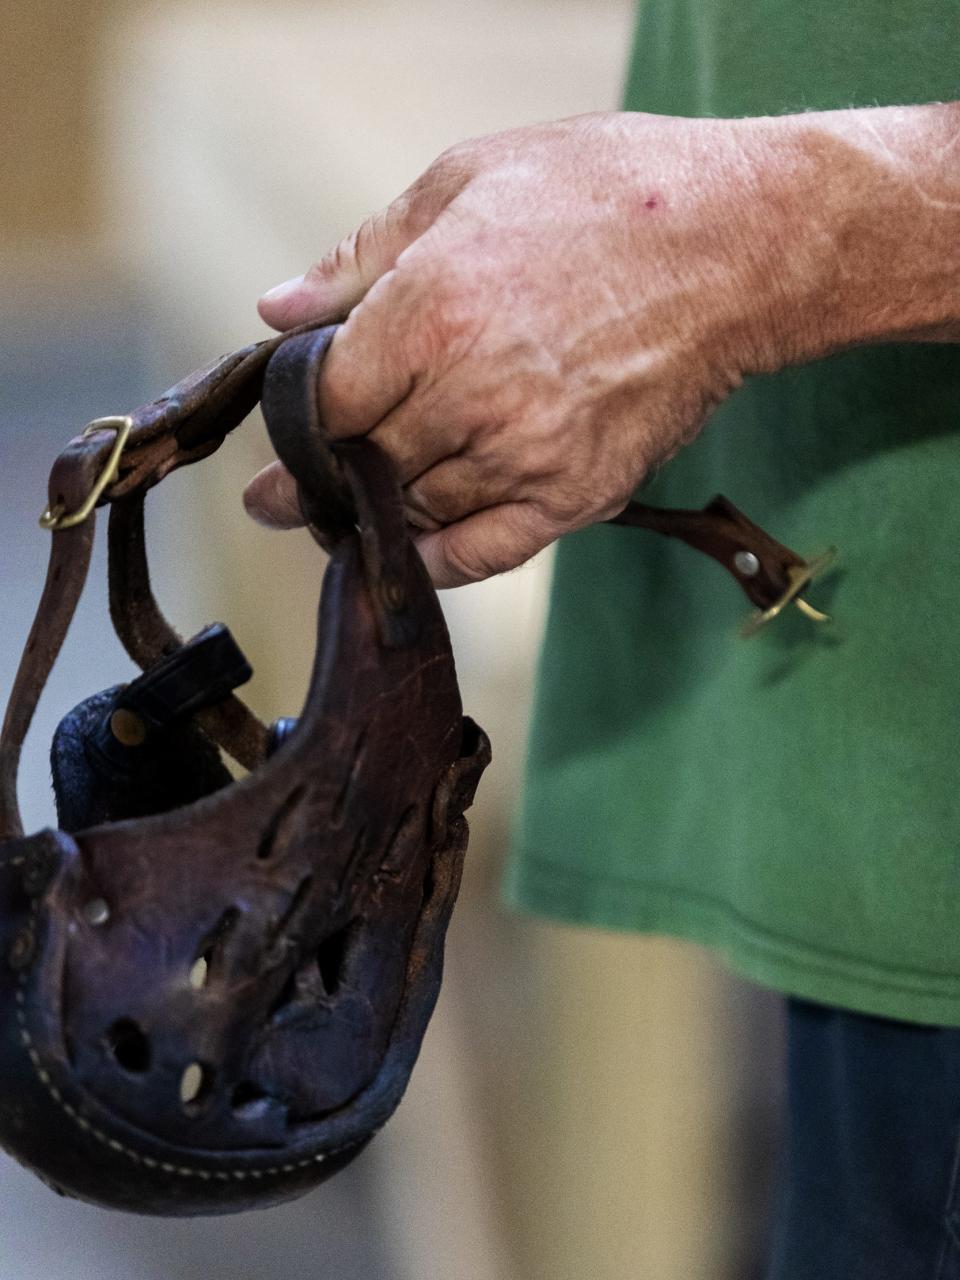 A man's hand holds a leather dog muzzle.